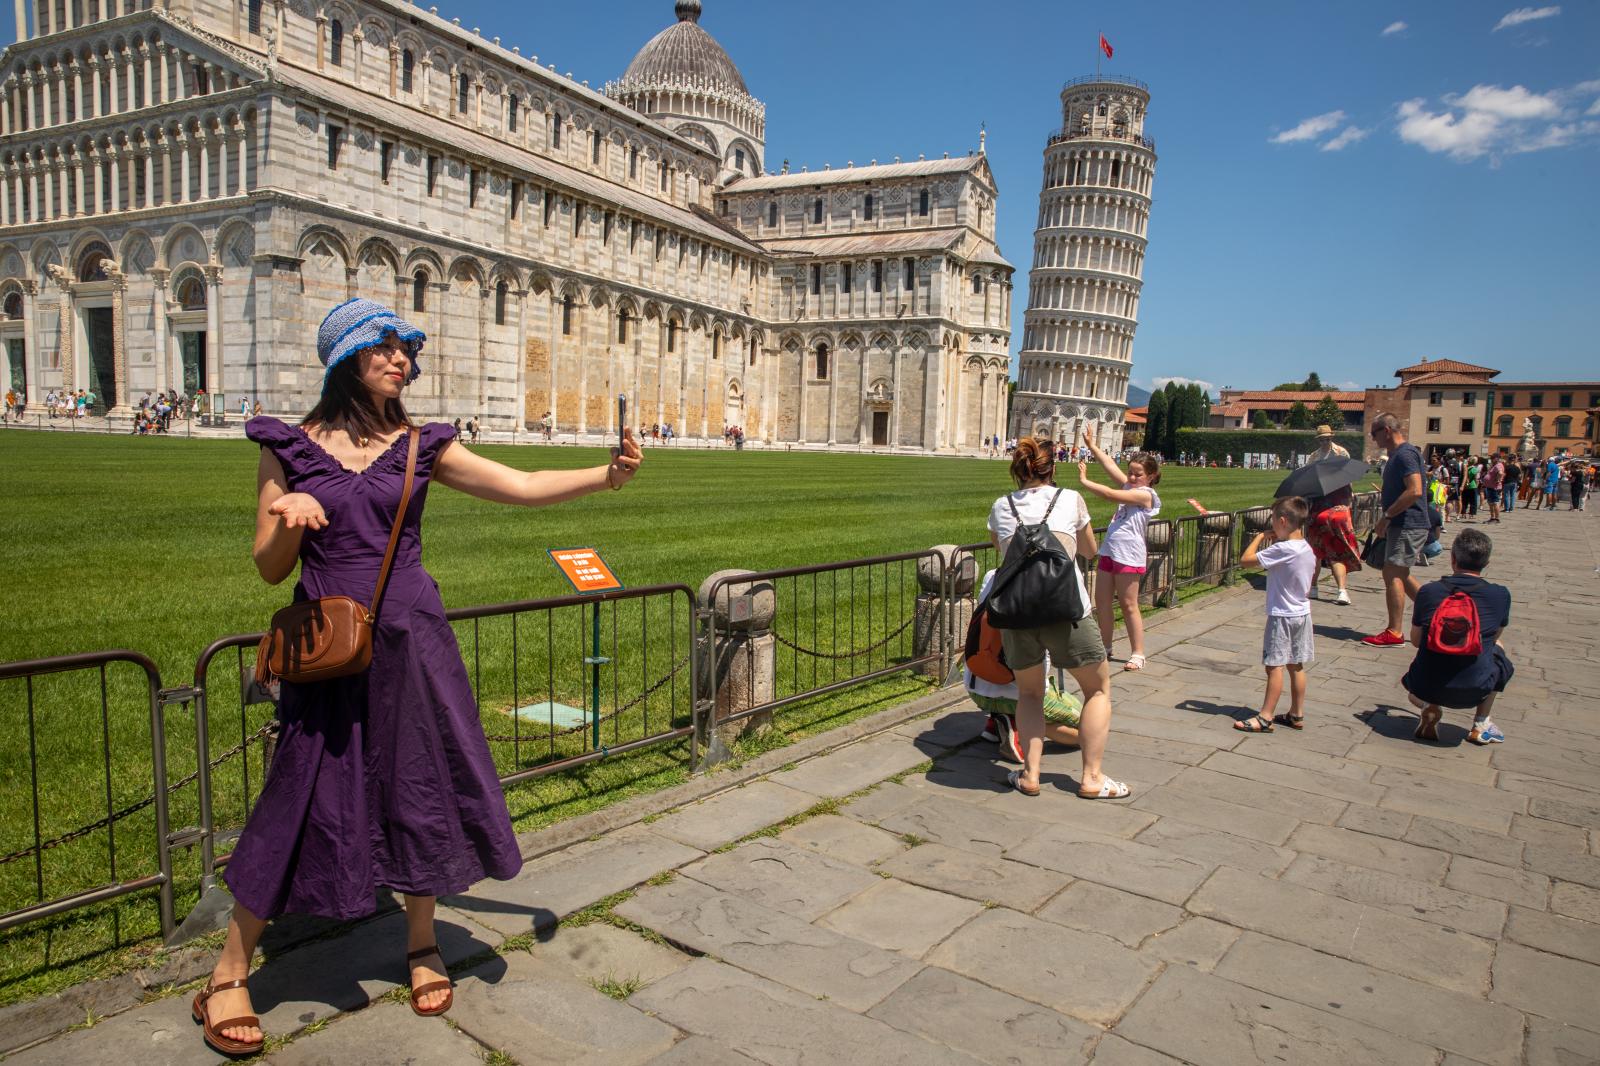 Selfies at the Leaning Tower of Pisa | Buy this image